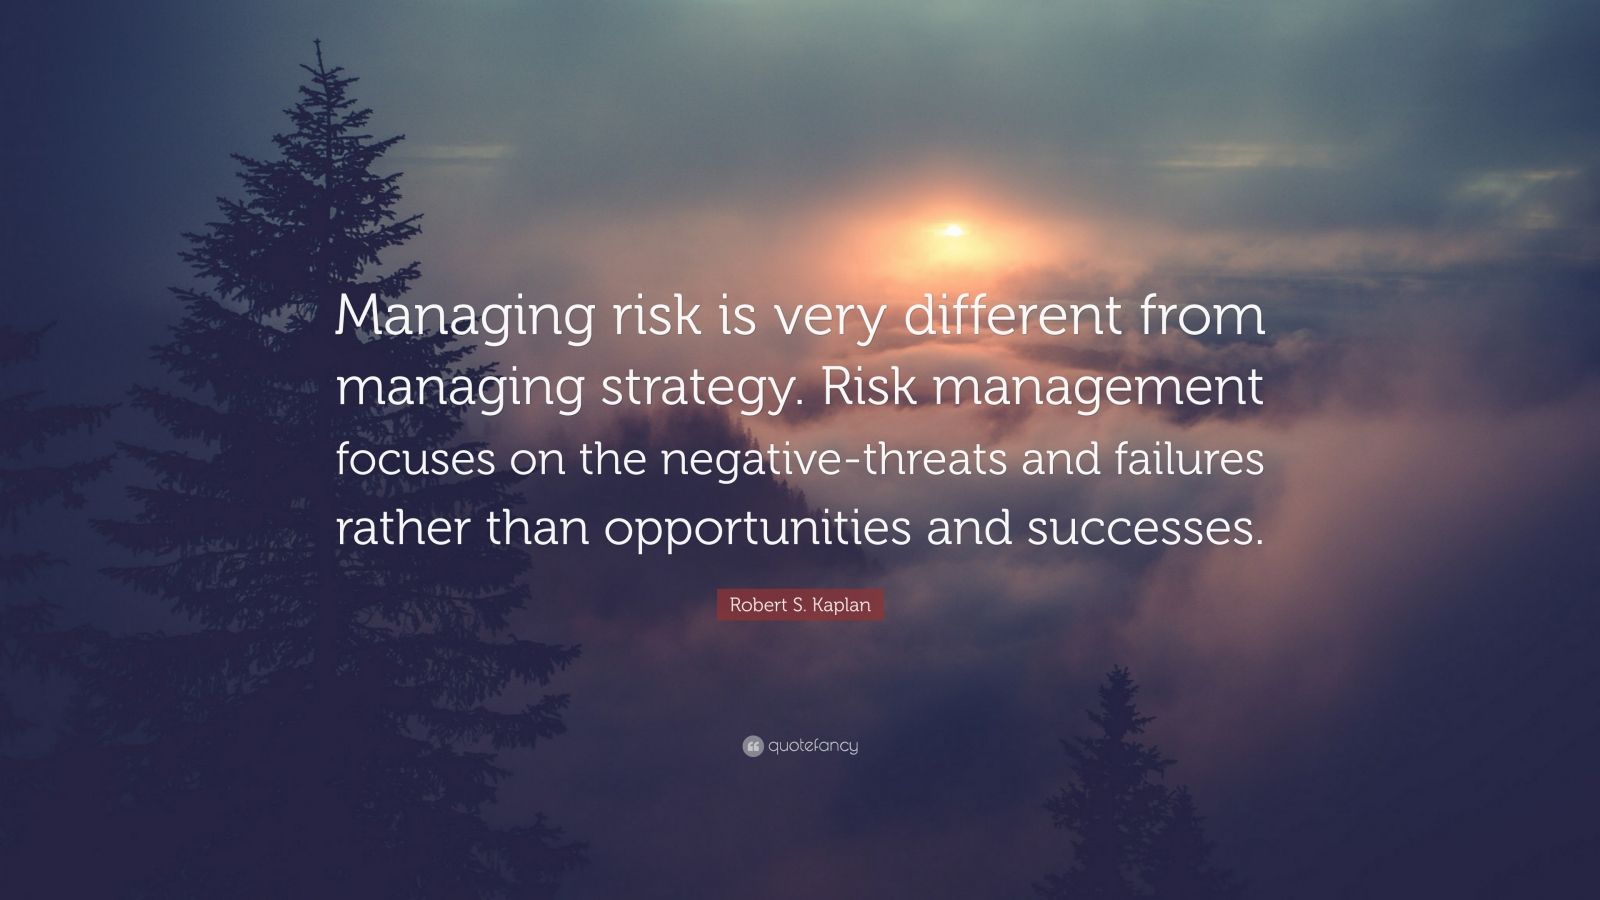 Robert S. Kaplan Quote: “Managing risk is very different from managing